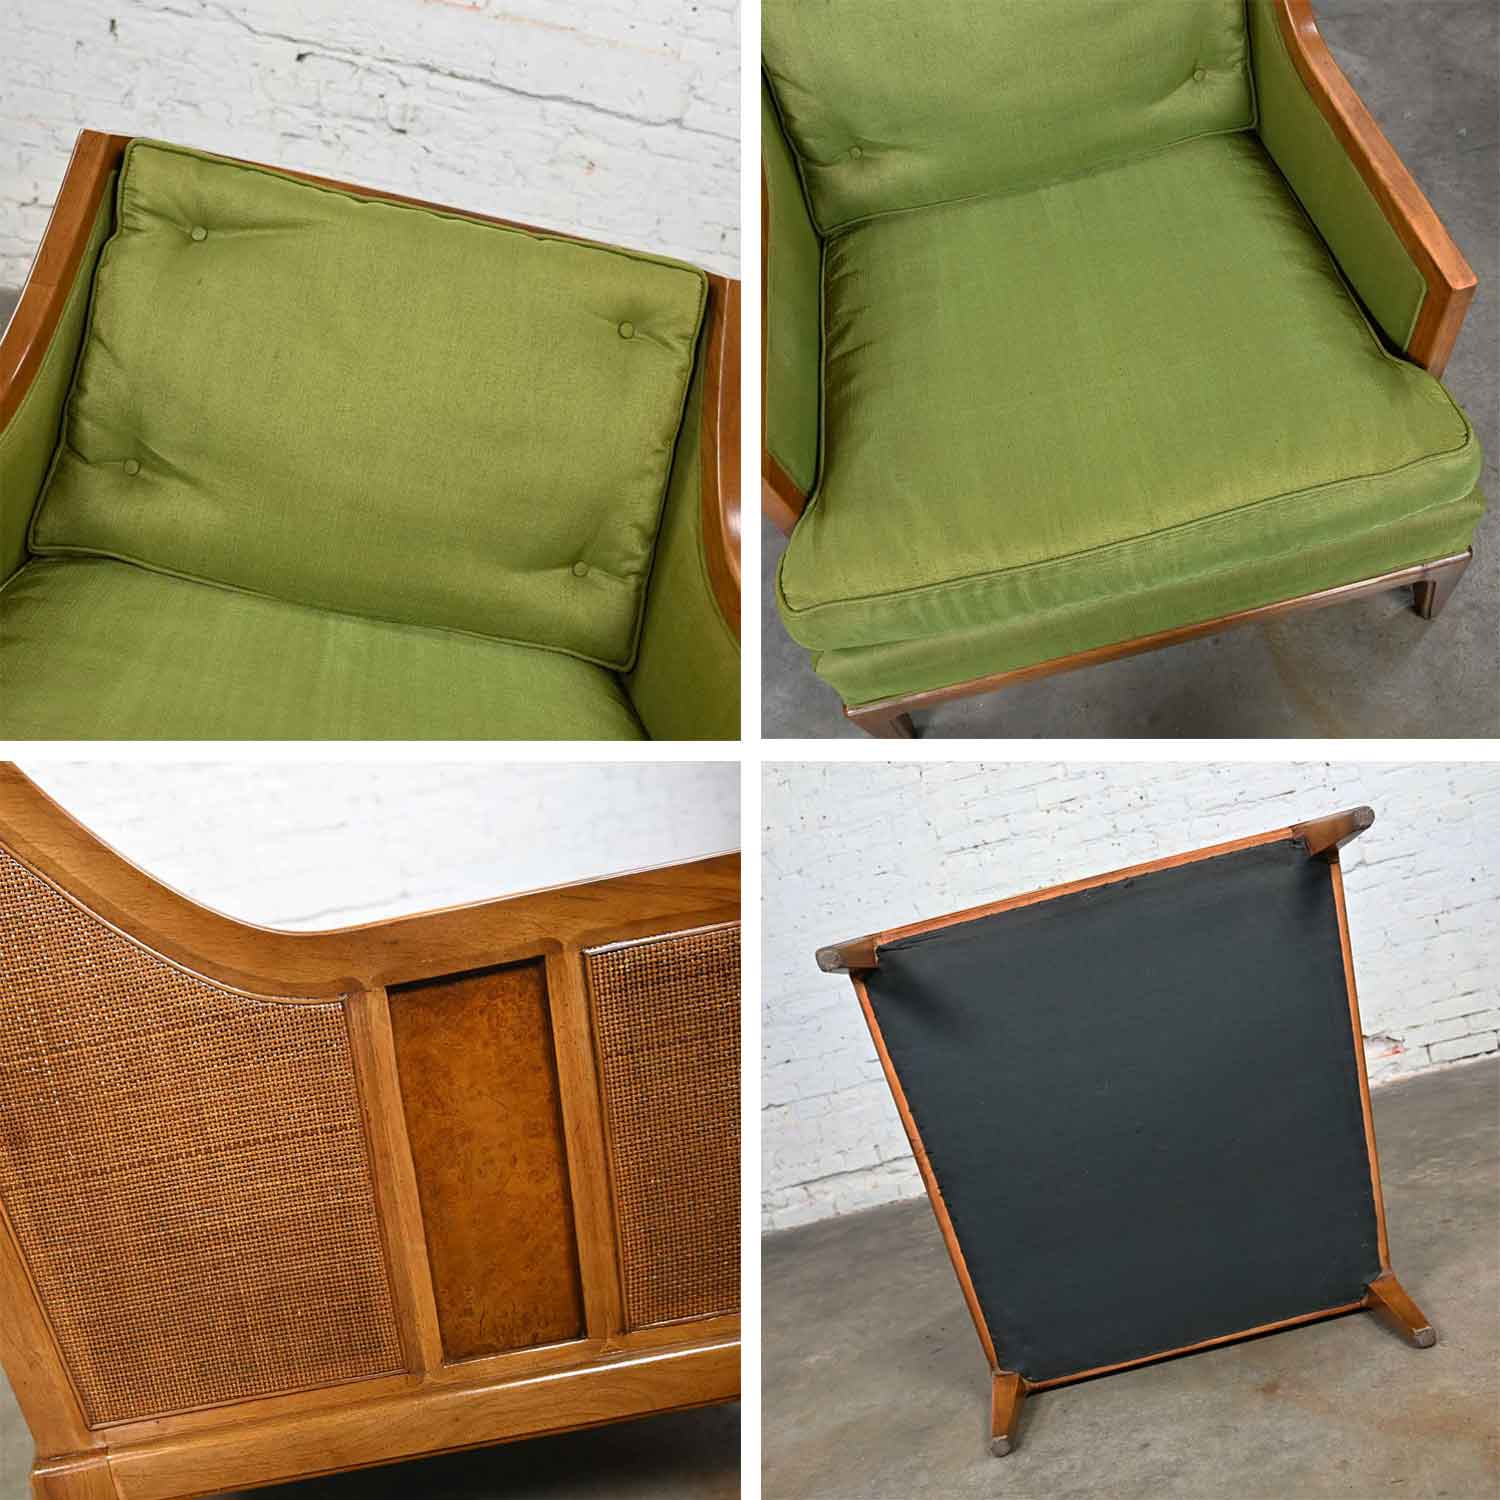 Vintage MCM Sears & Roebuck by Drexel Symphony Collection Green Upholstered & Cane Lounge Chair